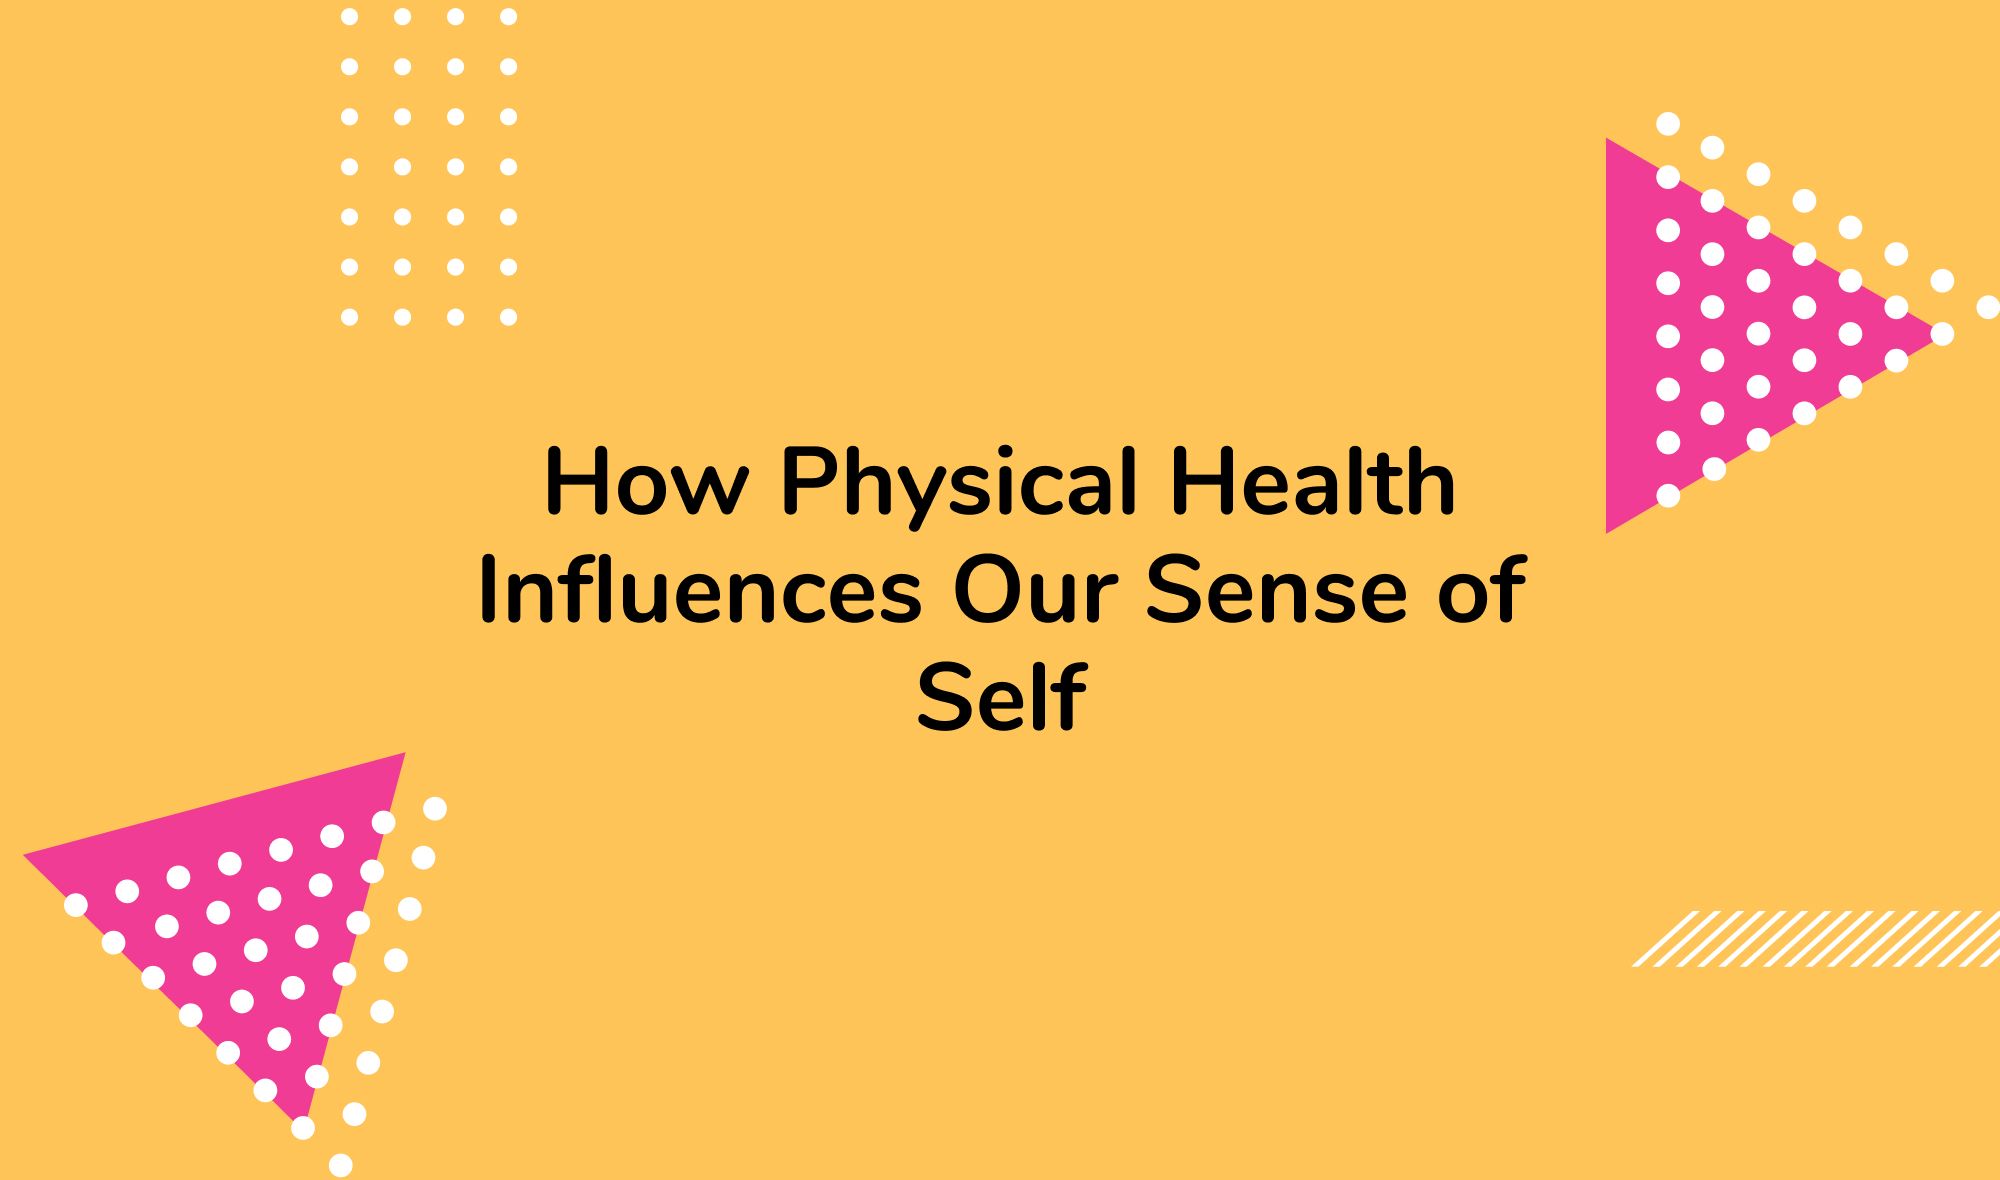 How Physical Health Influences Our Sense of Self